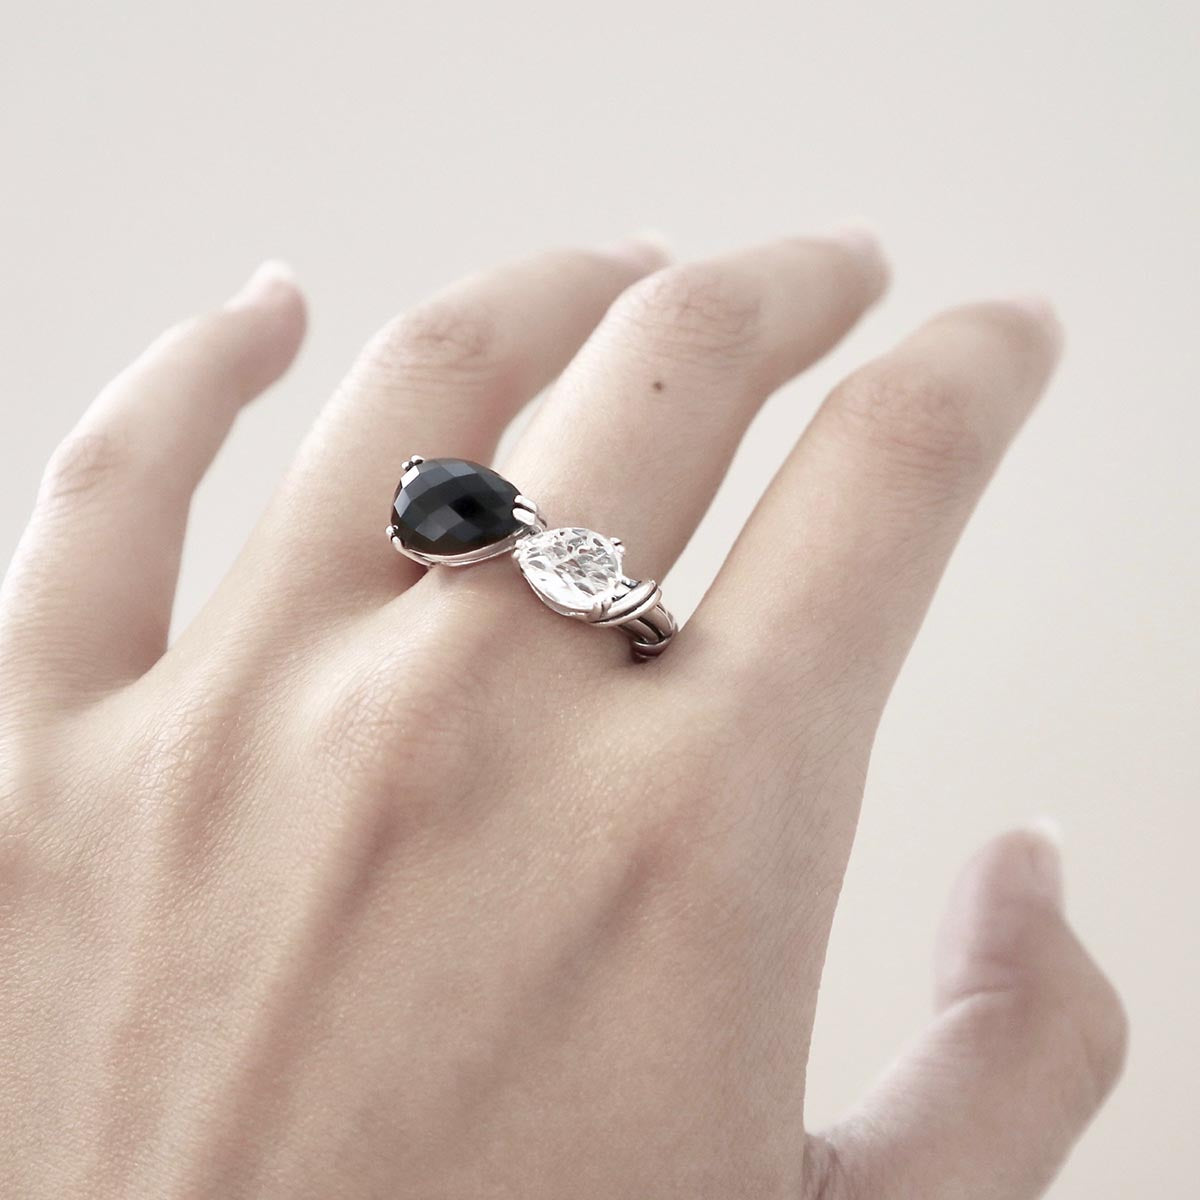 Fantasies Pear Bypass Ring in sterling silver with black onyx and rock crystal